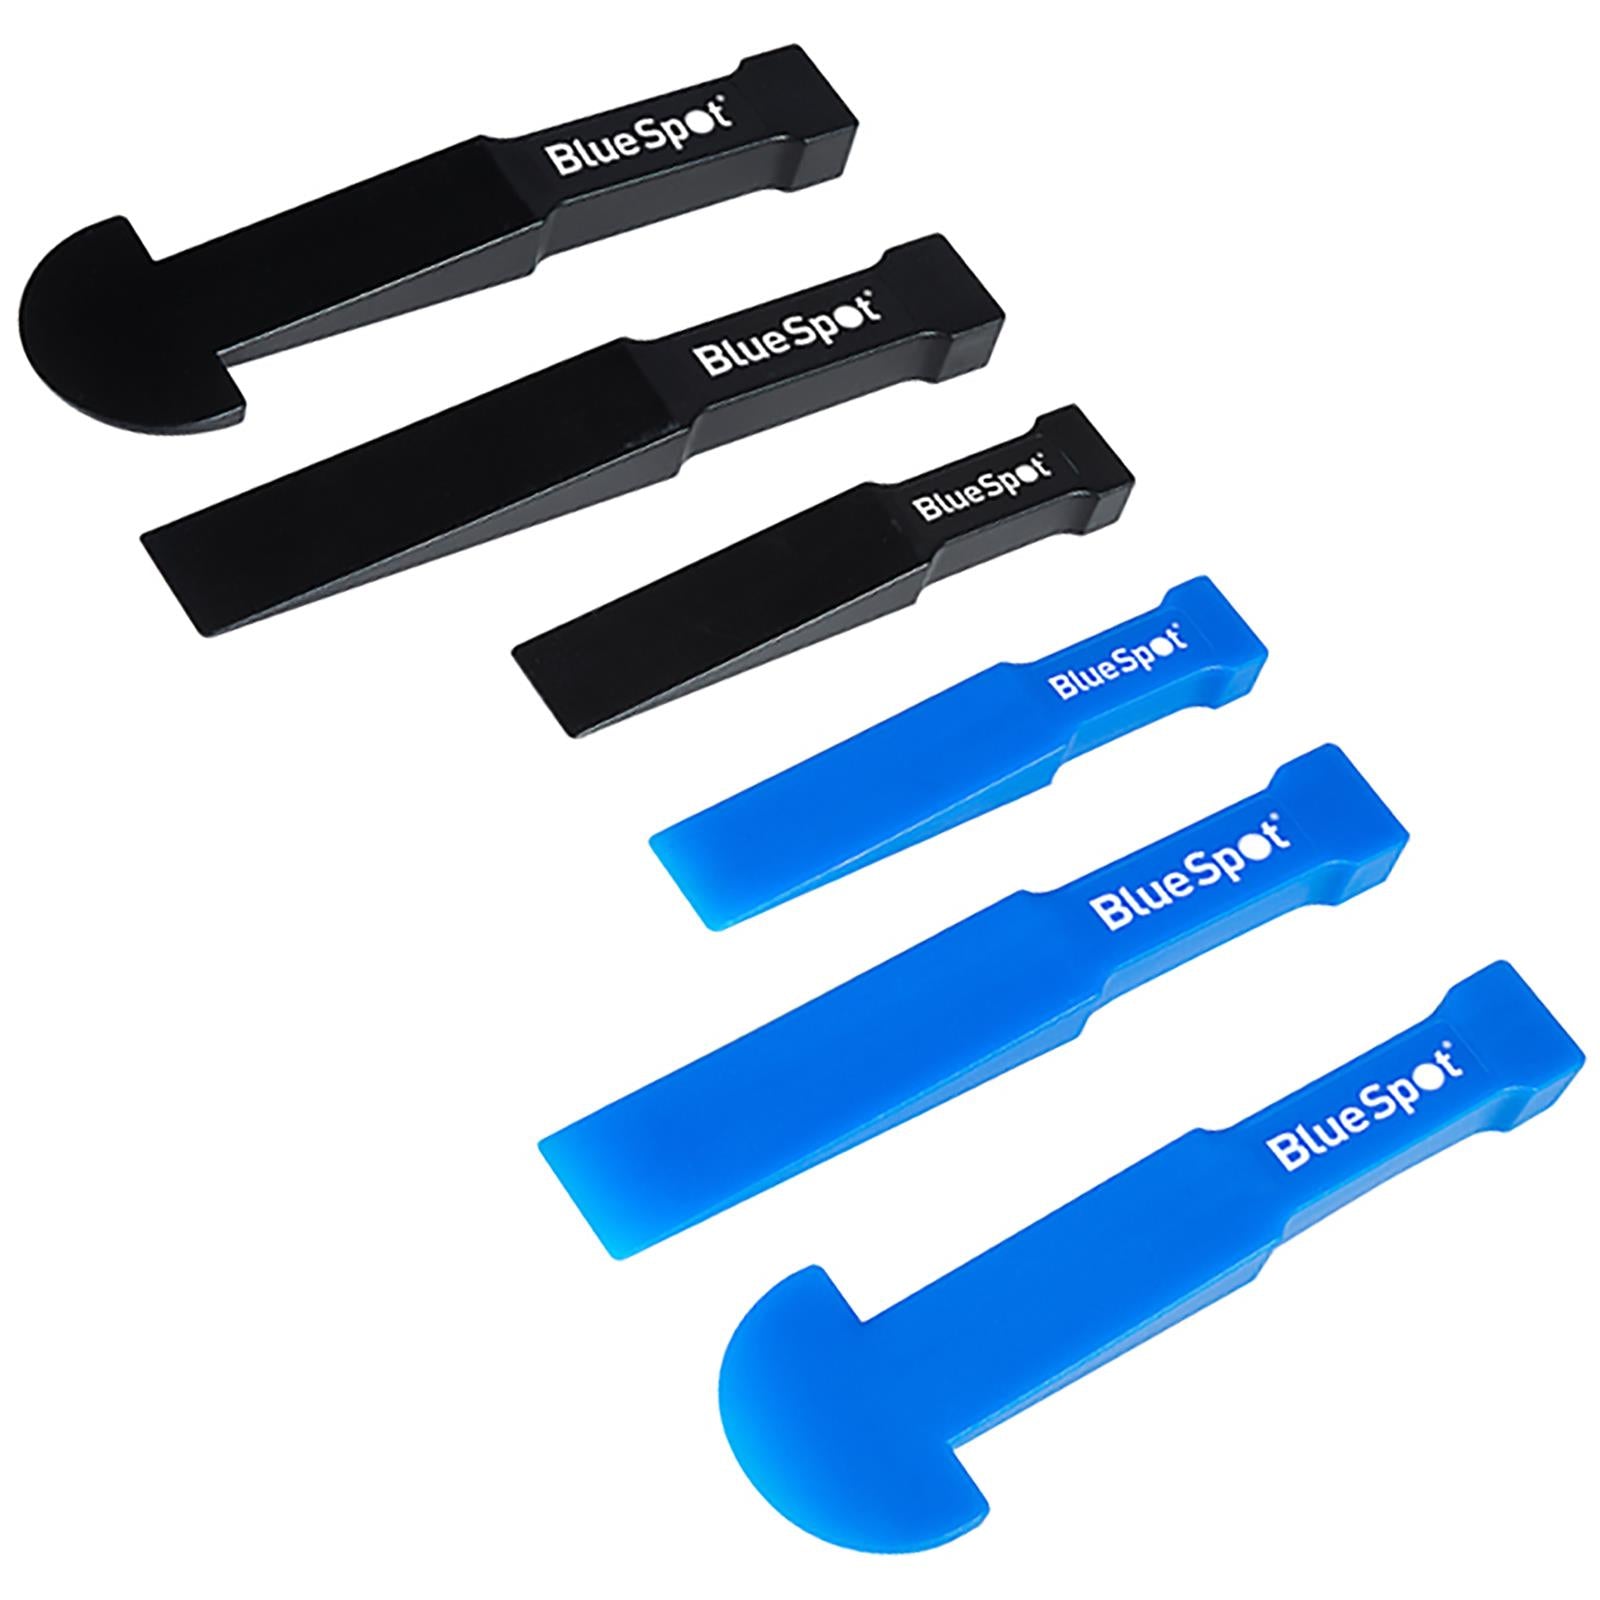 BlueSpot Non Marking Marring Trim And Pry Tool Set 6 Piece